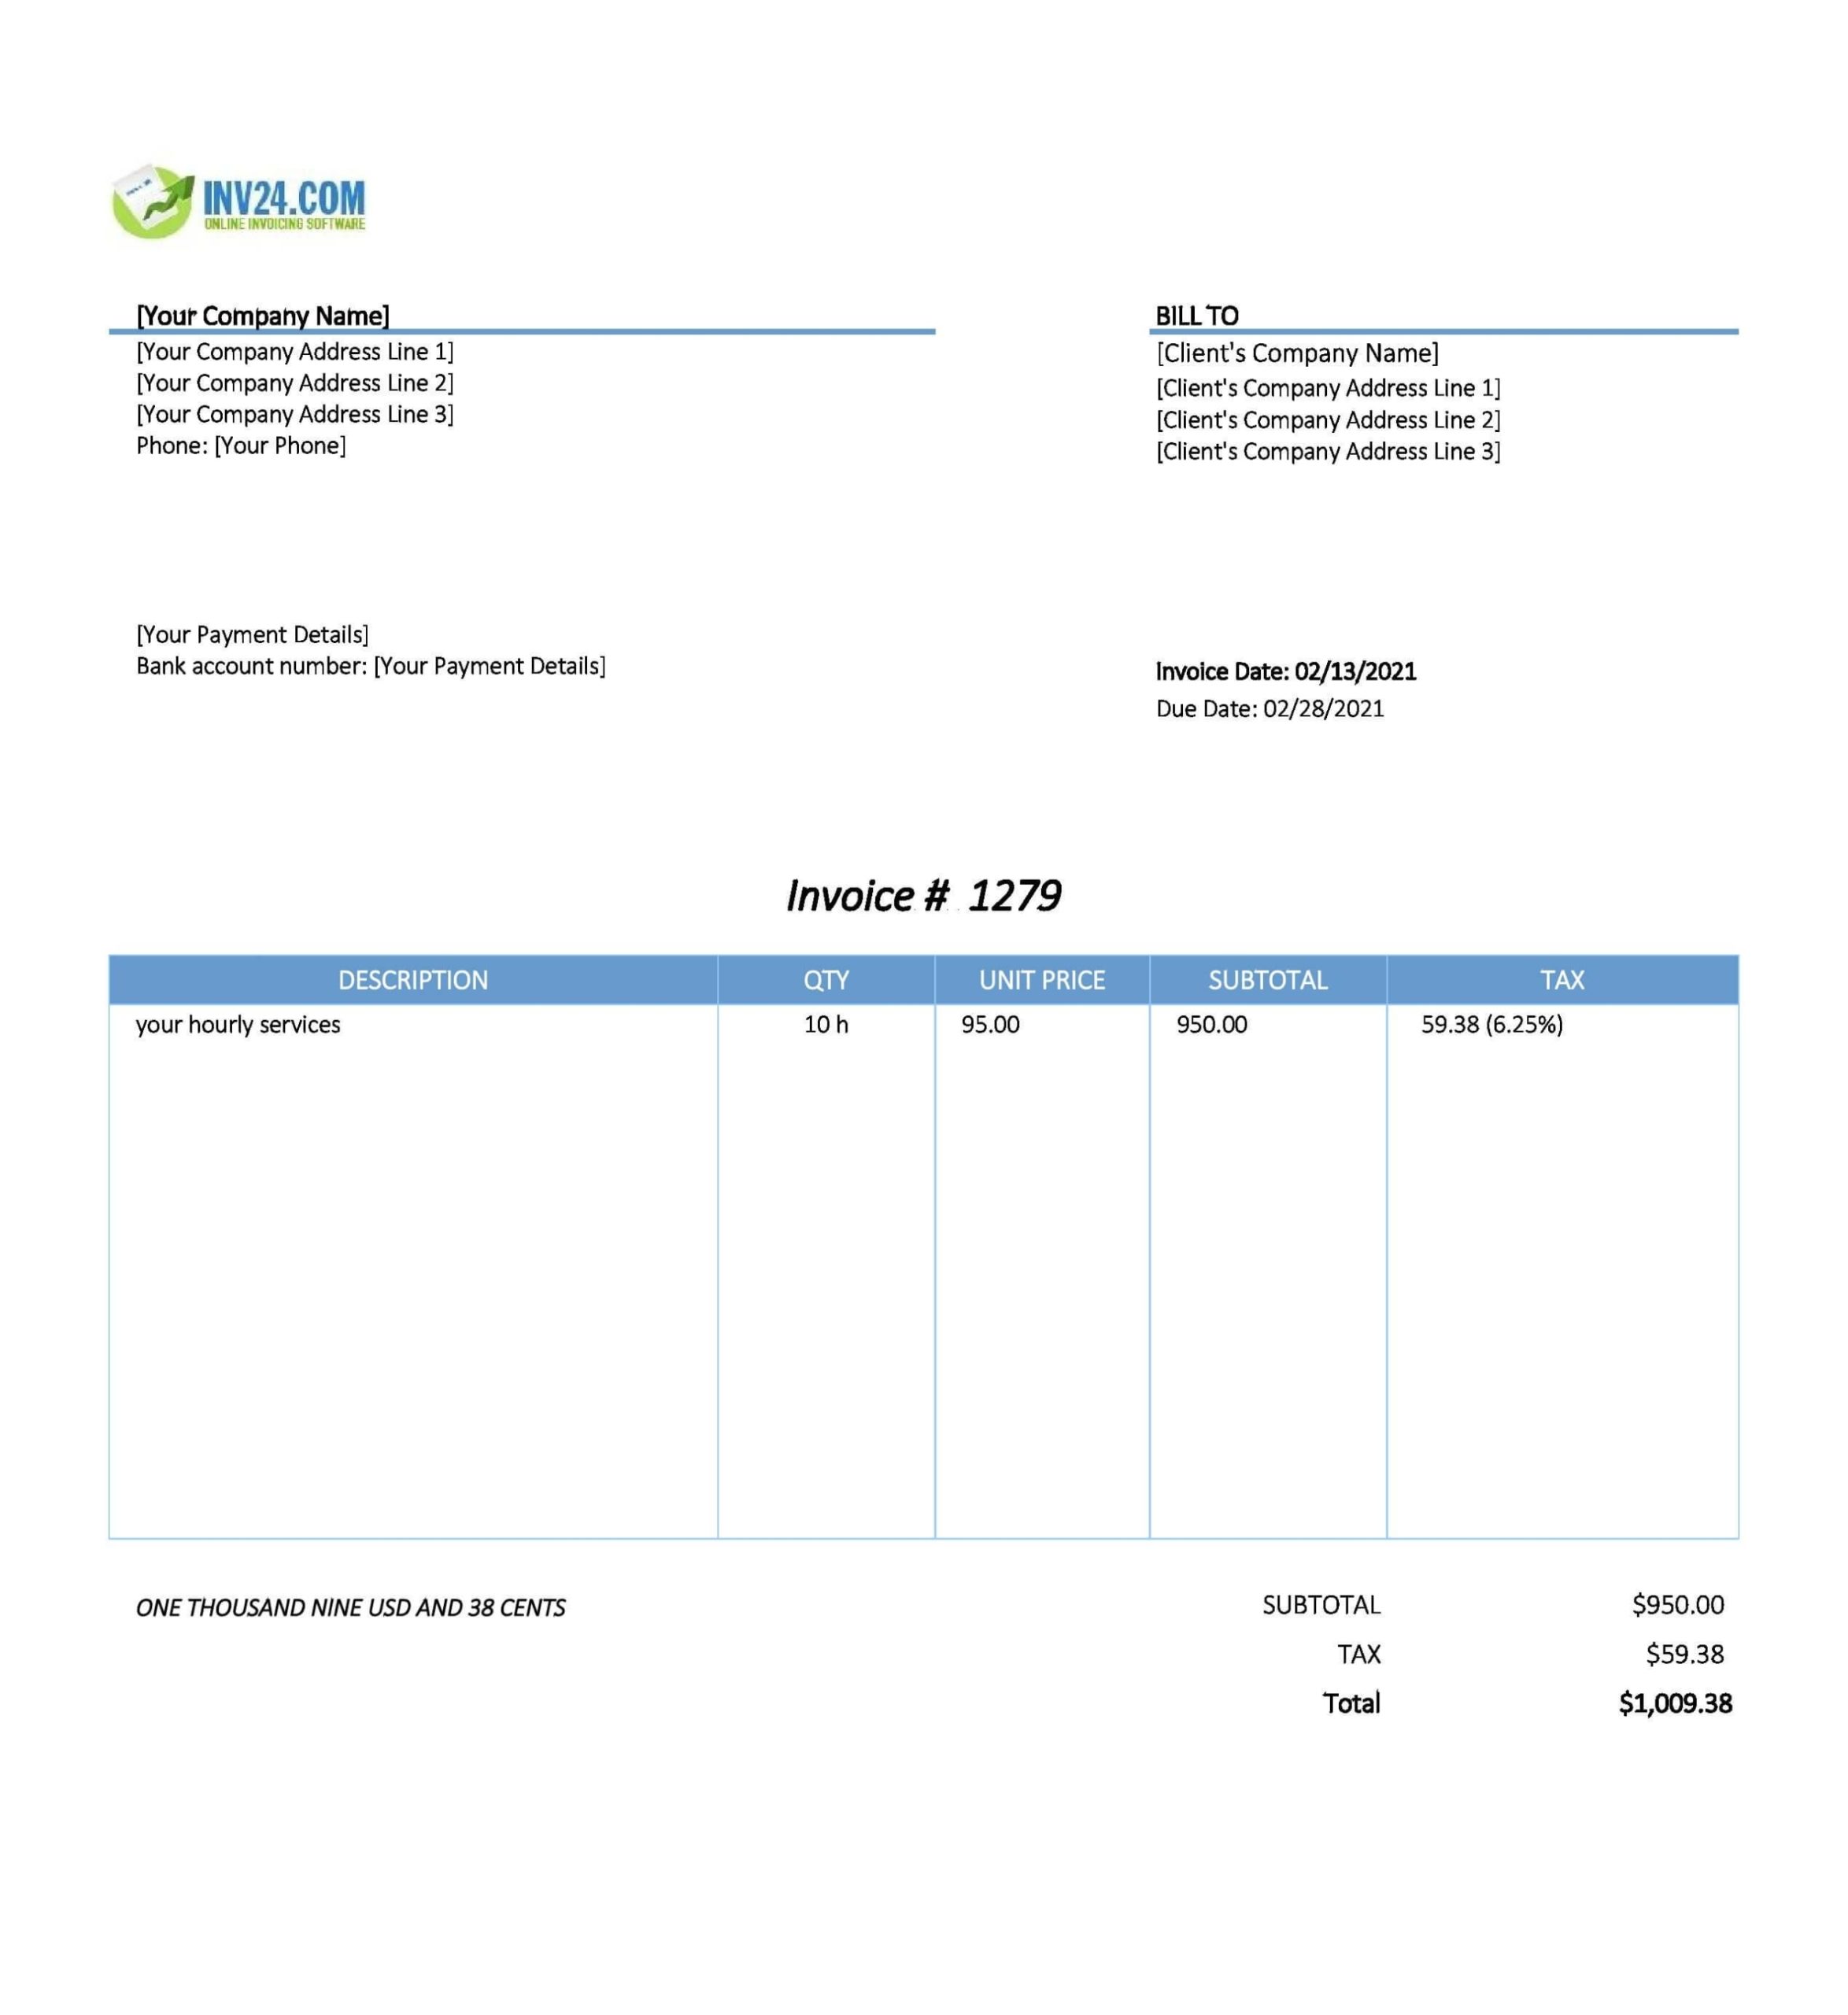 Timesheet Invoice Template Excel for Timesheet Invoice Template Excel